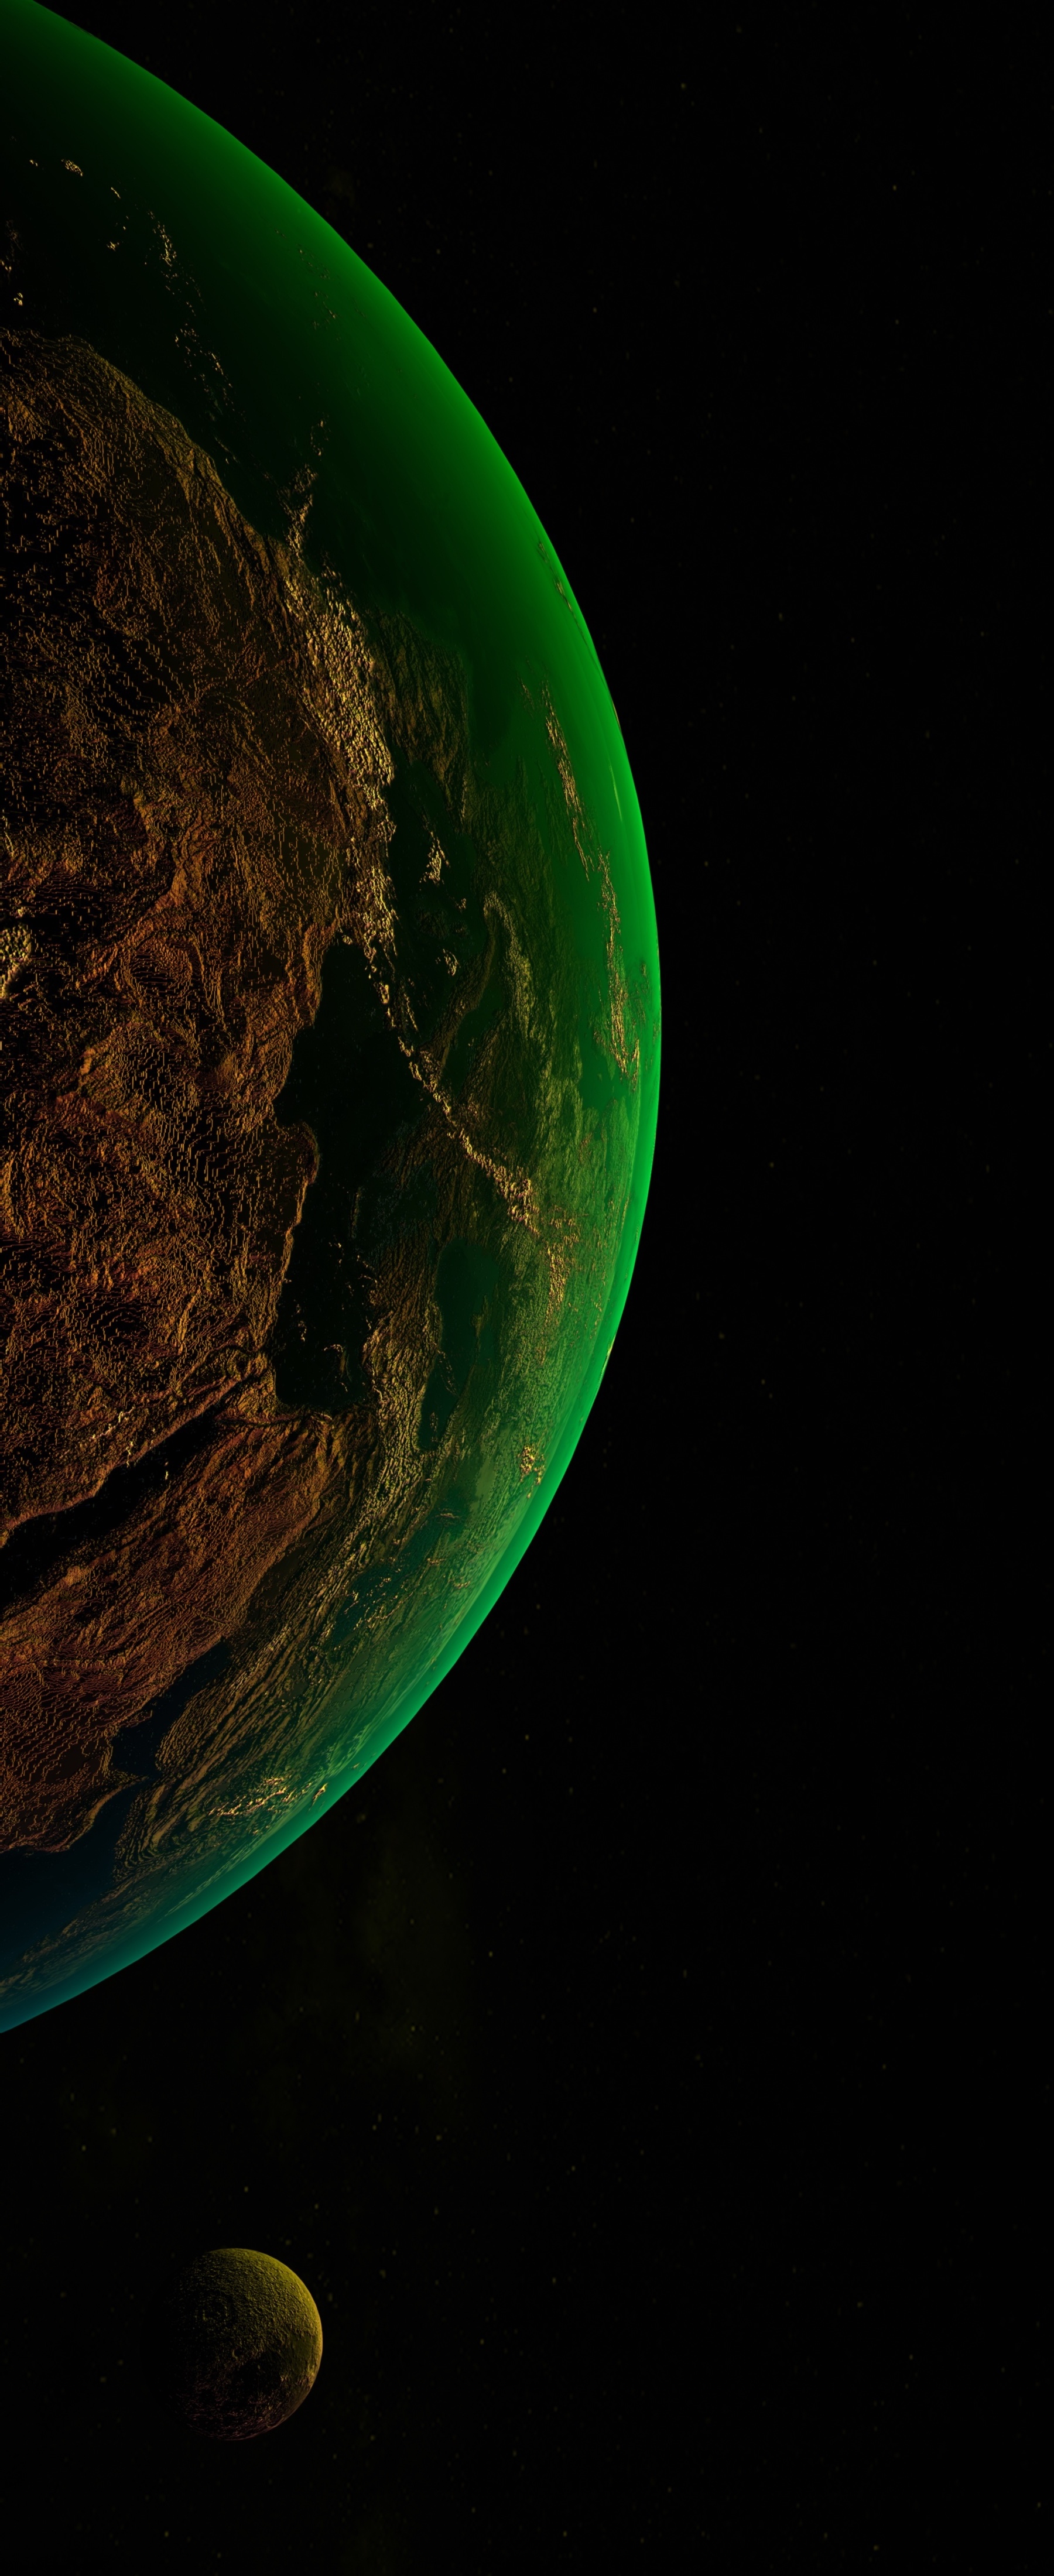 High Definition Earth background